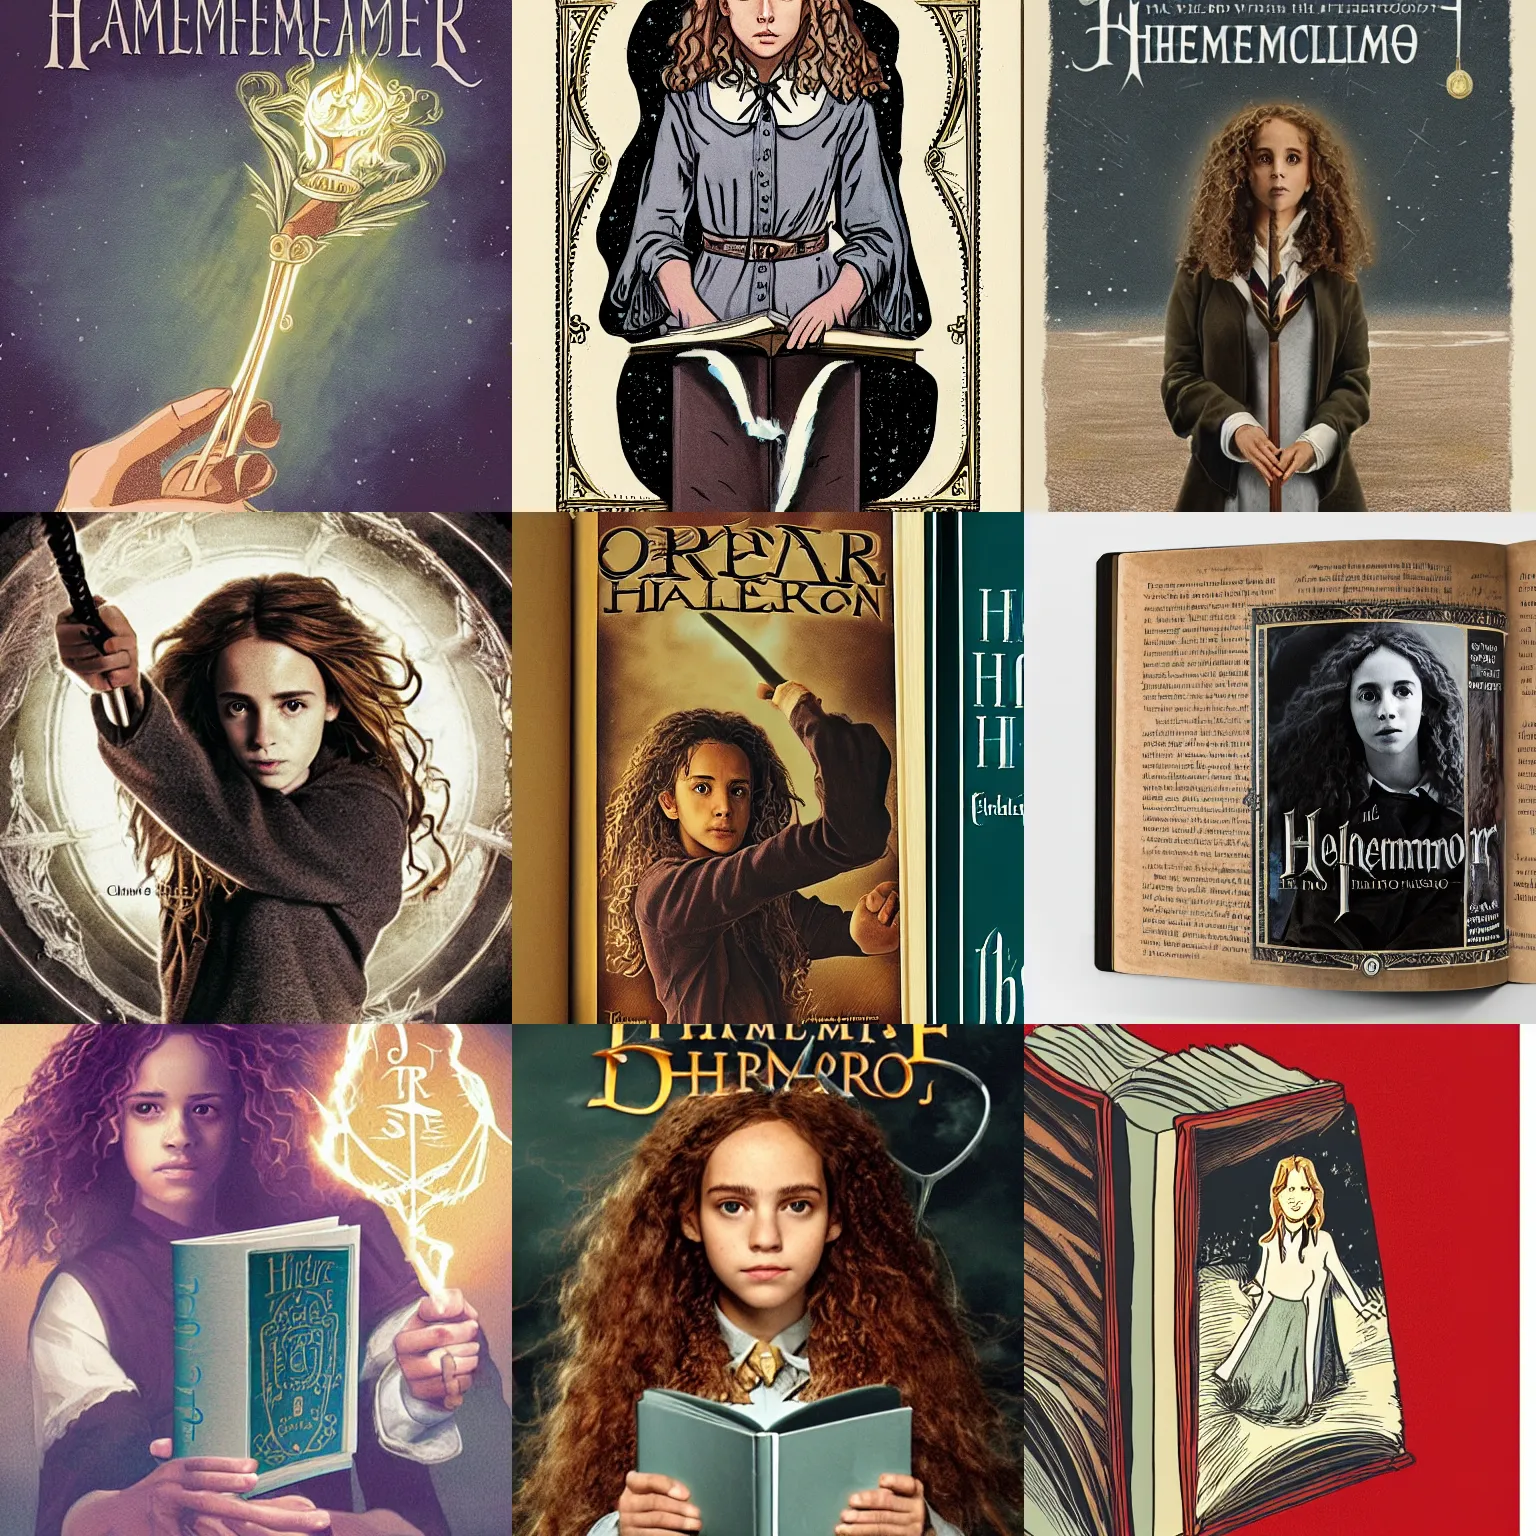 Prompt: A book, the cover art is an image of Hermione Granger holding the elder wand